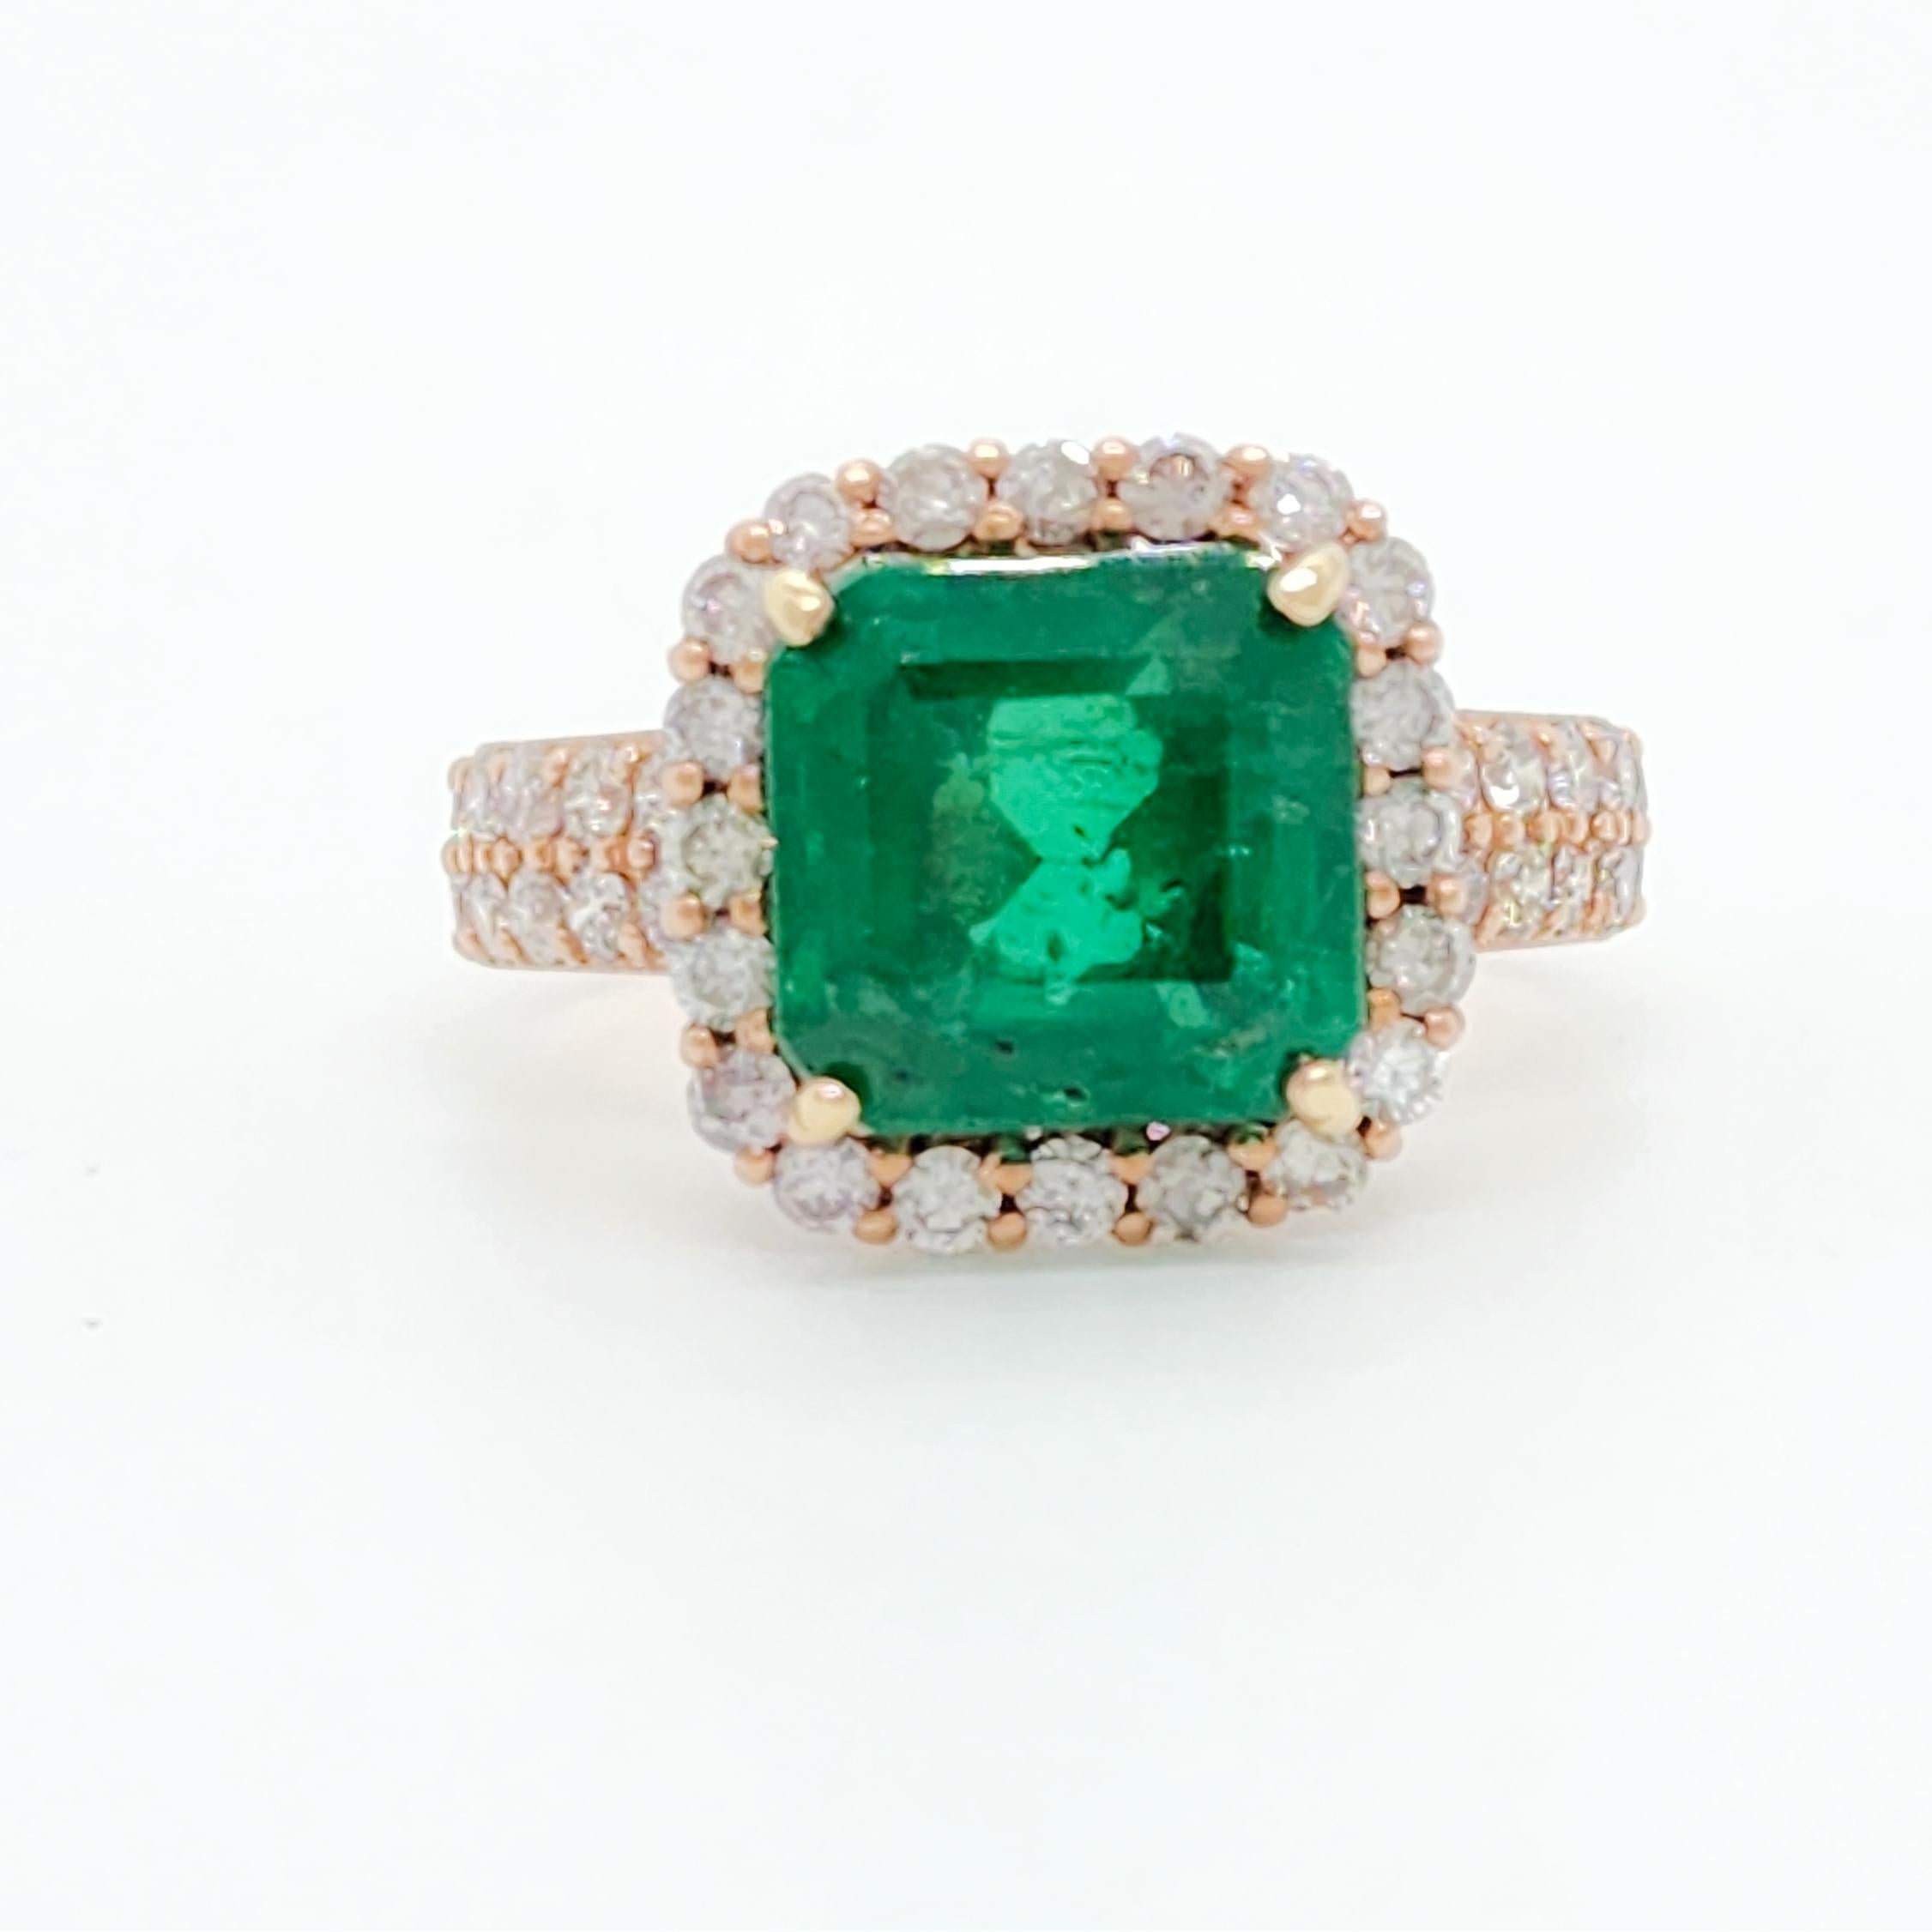 Gorgeous 4.33 ct. bright green Zambian emerald octagon with good quality white diamond rounds.  Handmade in 18k rose gold.  Ring size 7.75.